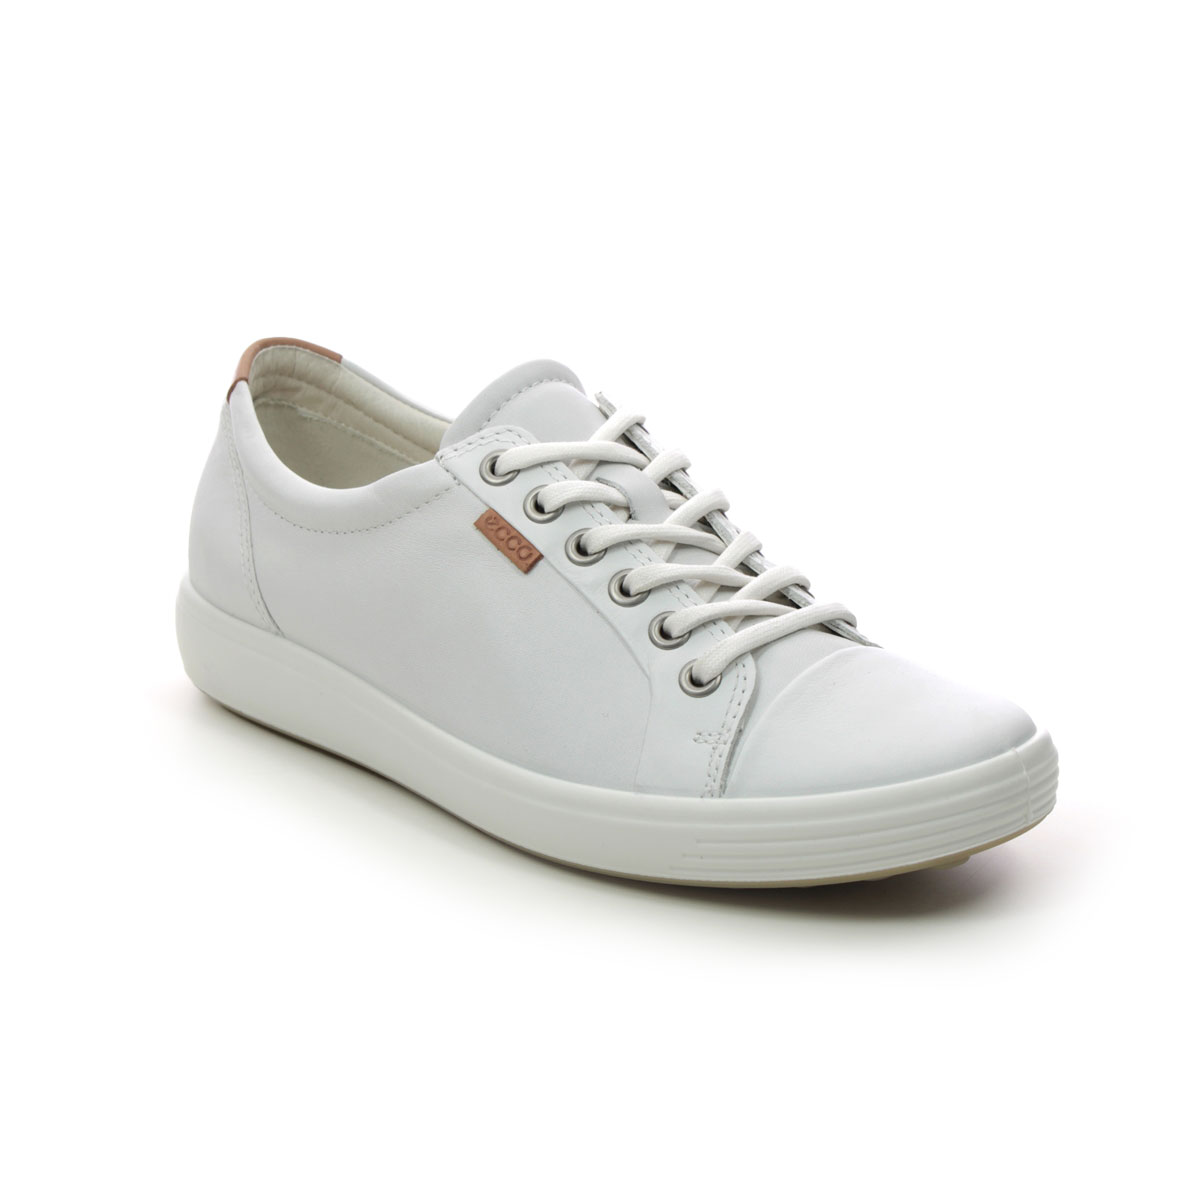 Ecco Soft 7 Lace White Leather Womens Trainers 430003-01007 In Size 36 In Plain White Leather